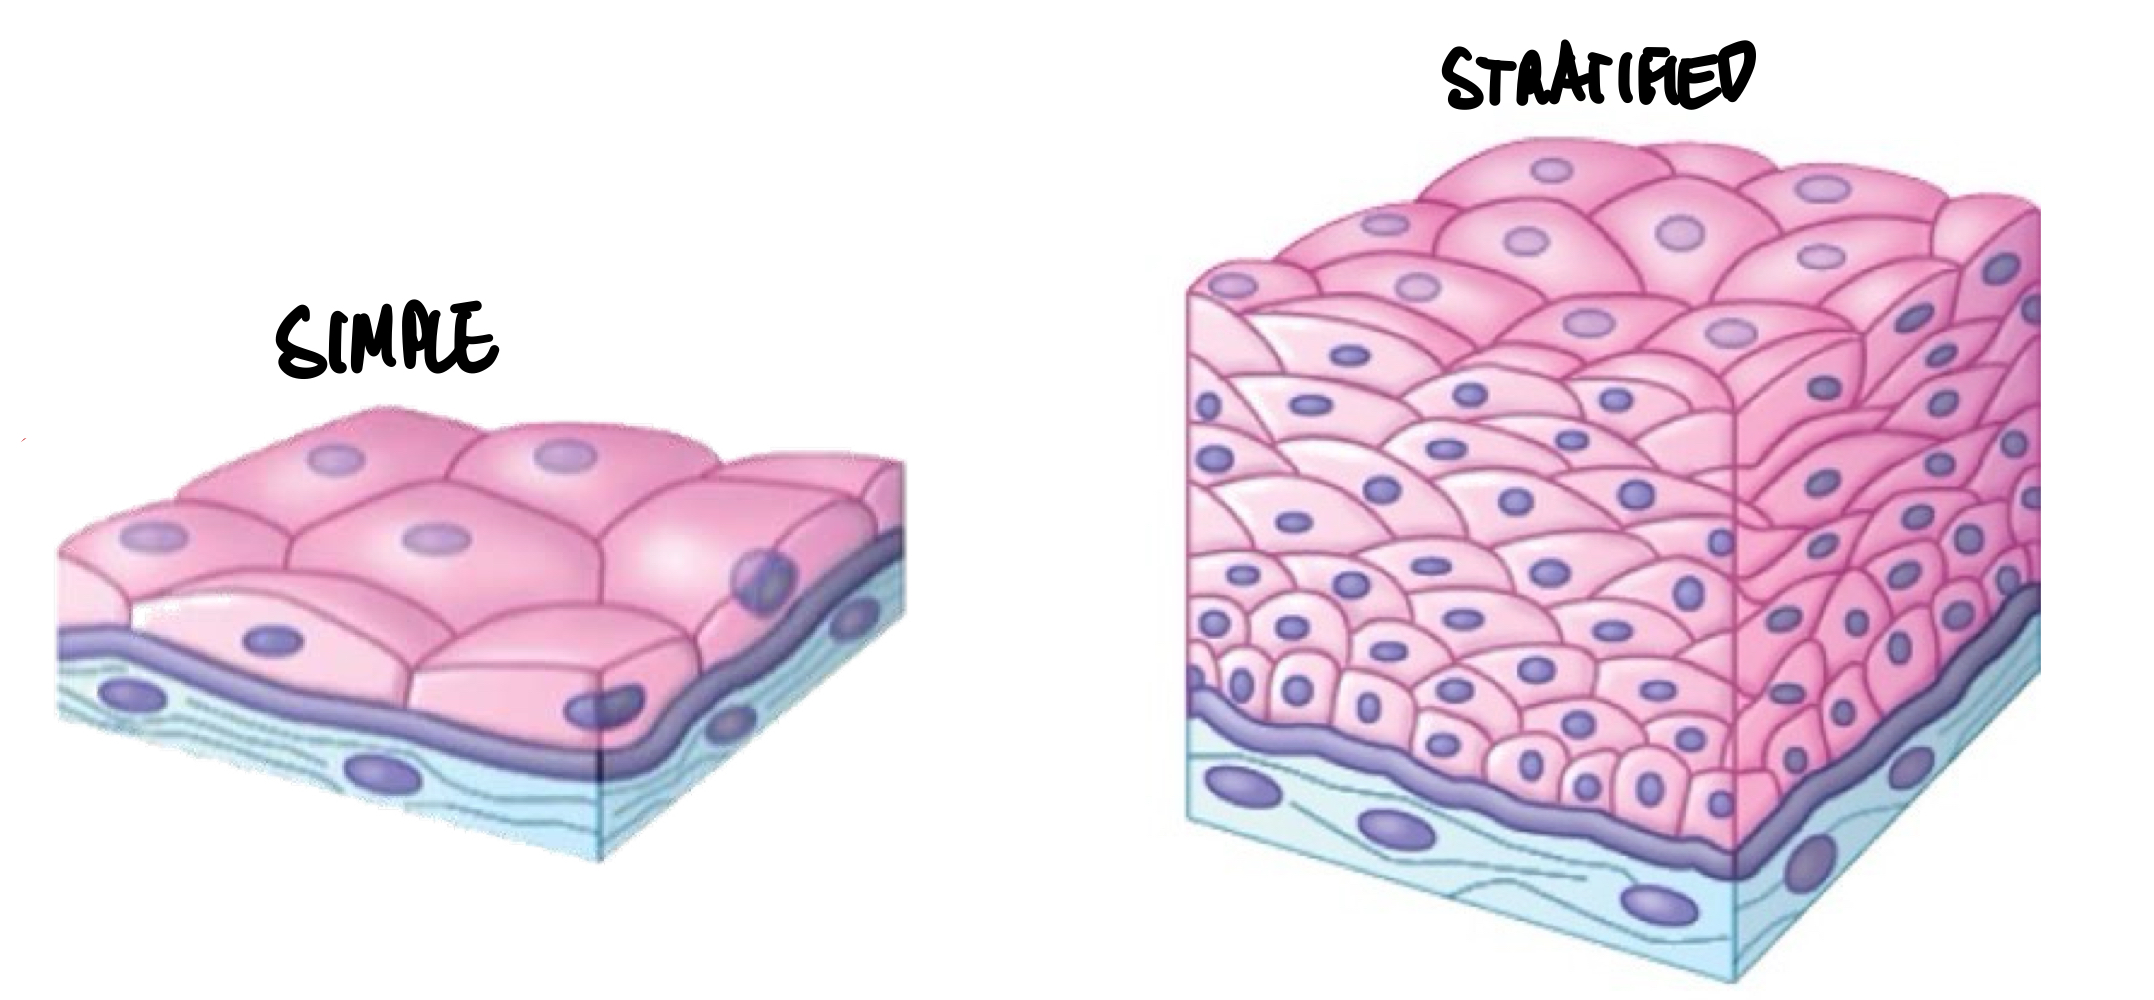 <ul><li><p>Simple epithelium, which consists of a single layer of cells, involved in processes where diffusion, absorption, and secretion occur.</p></li><li><p>Stratified epithelium, which consists of multiple layers of cells stacked on top of each other, involved in protection for its own tissue.</p></li></ul>